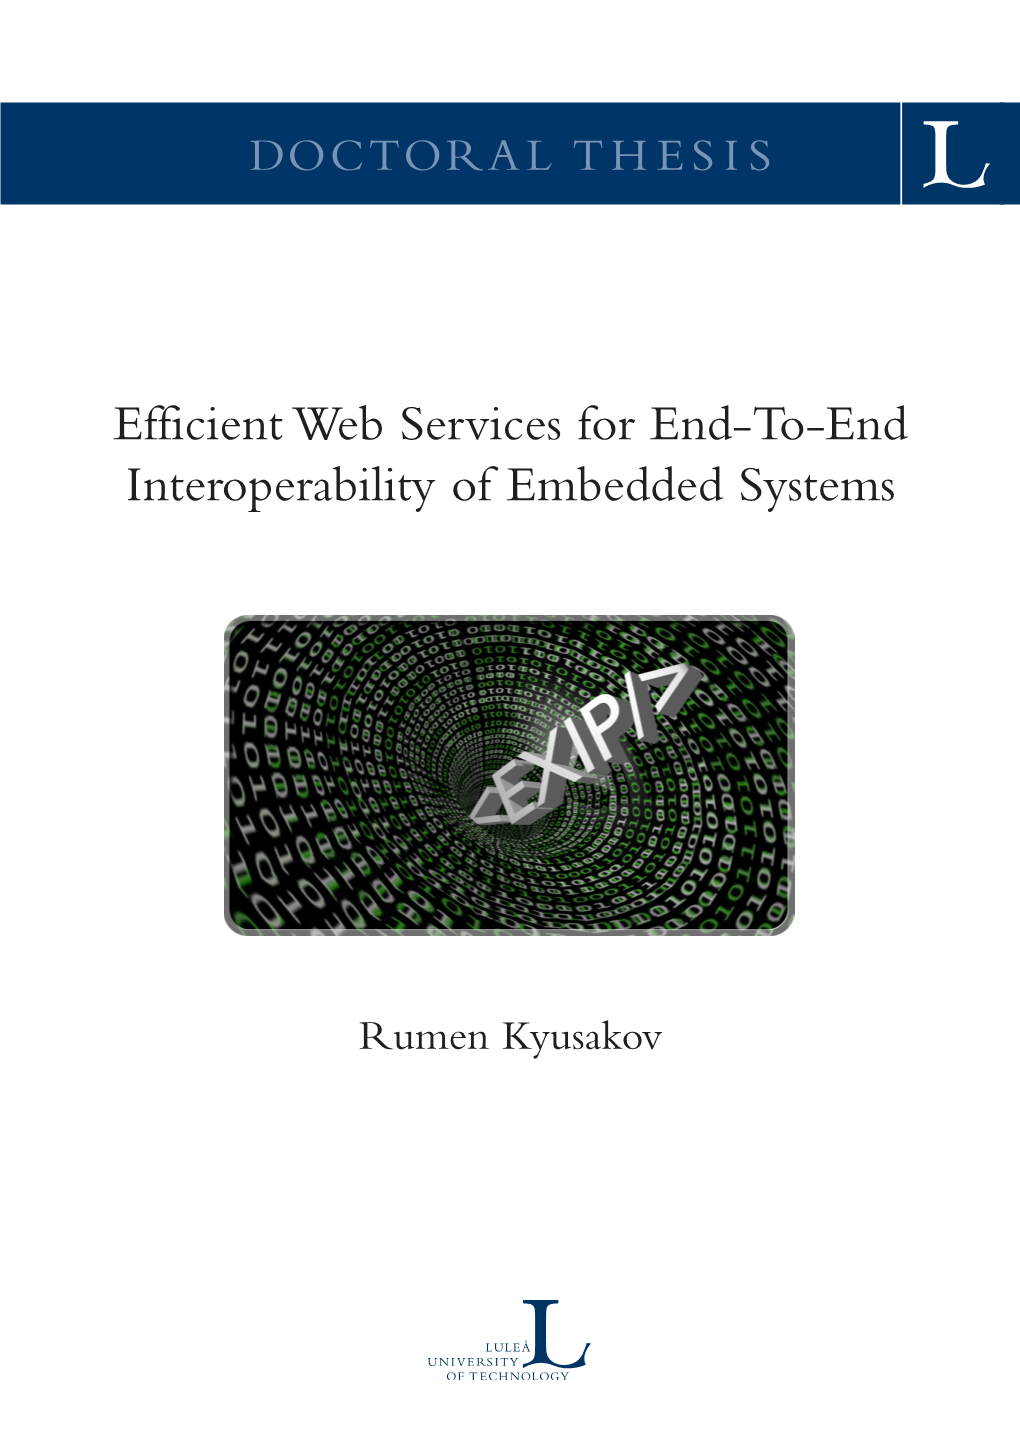 Efficient Web Services for End-To-End Interoperability